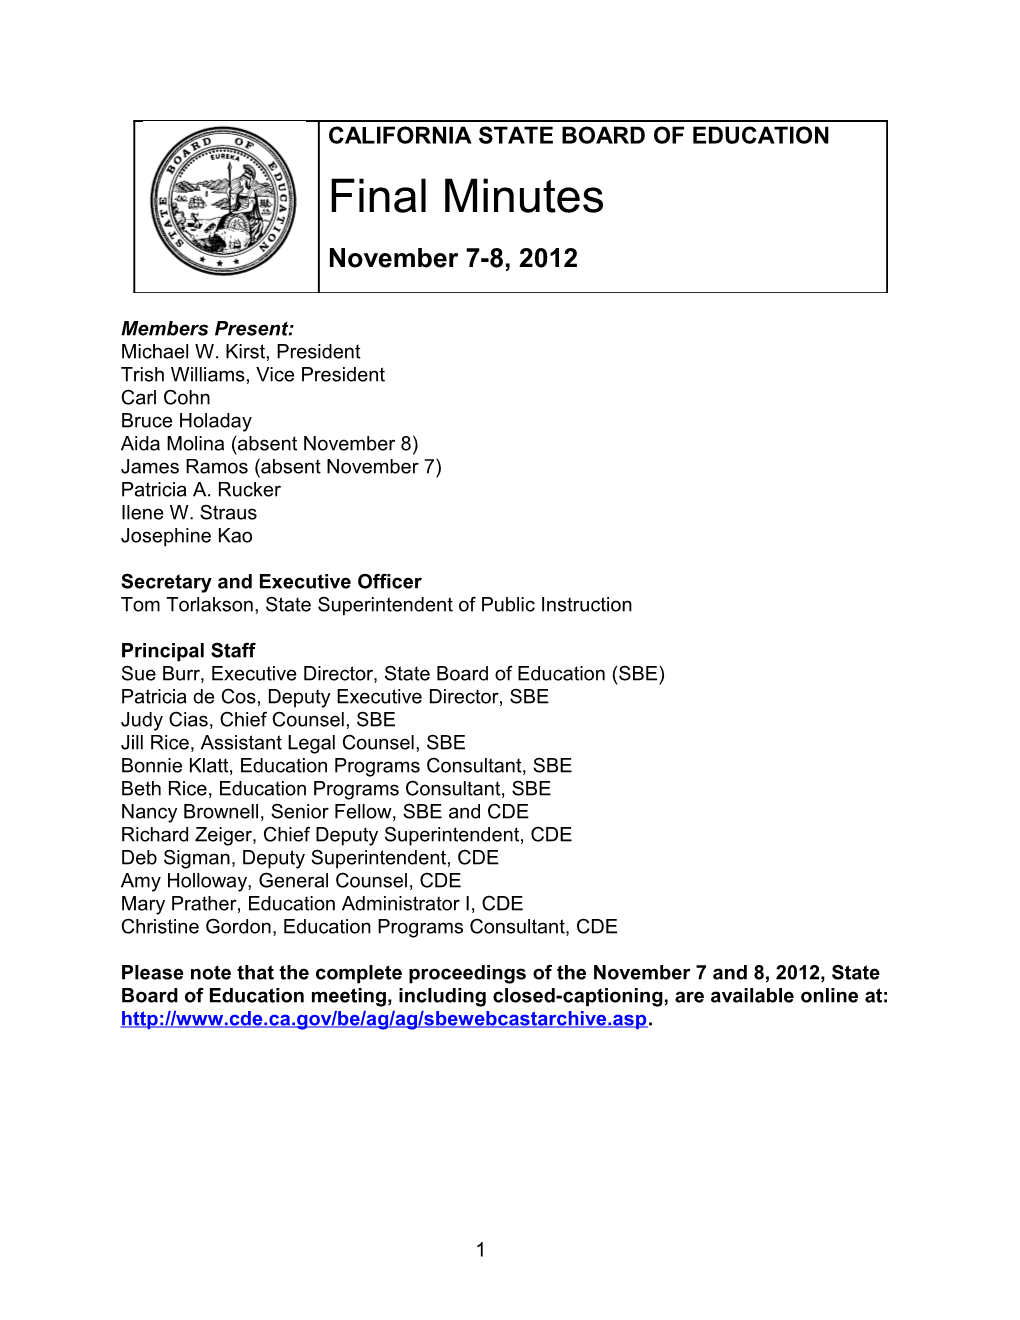 Final Minutes for November 7-8, 2012 - SBE Minutes (CA State Board of Education)